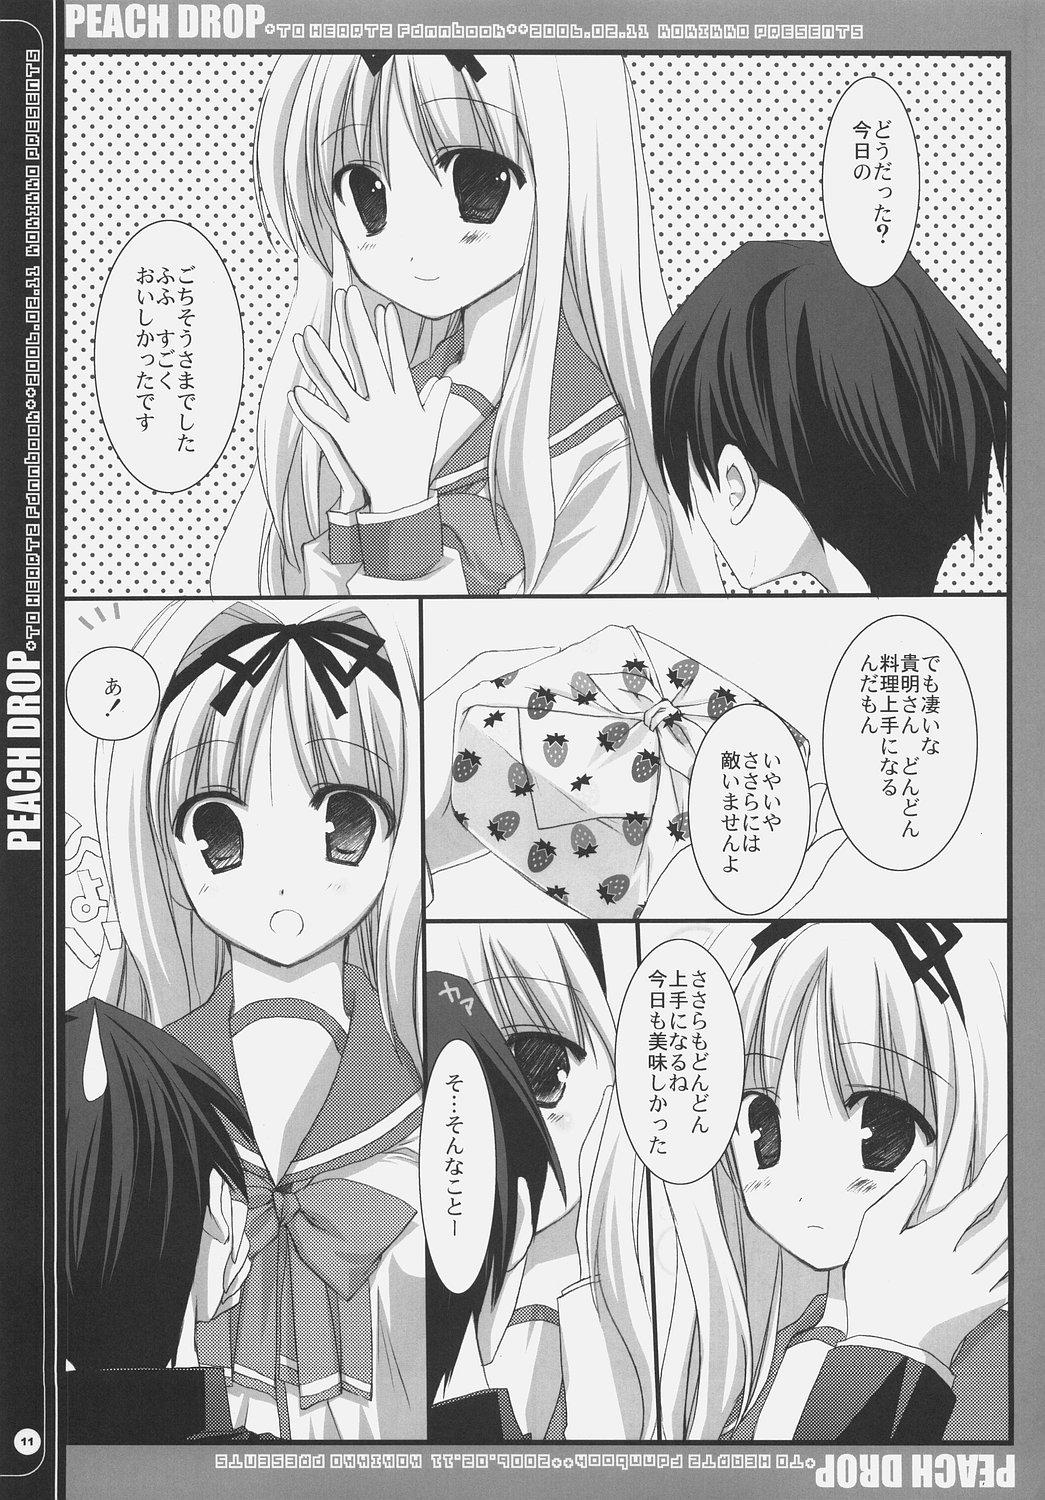 Lolicon Peach Drop Kaiteiban - Toheart2 Twinks - Page 10